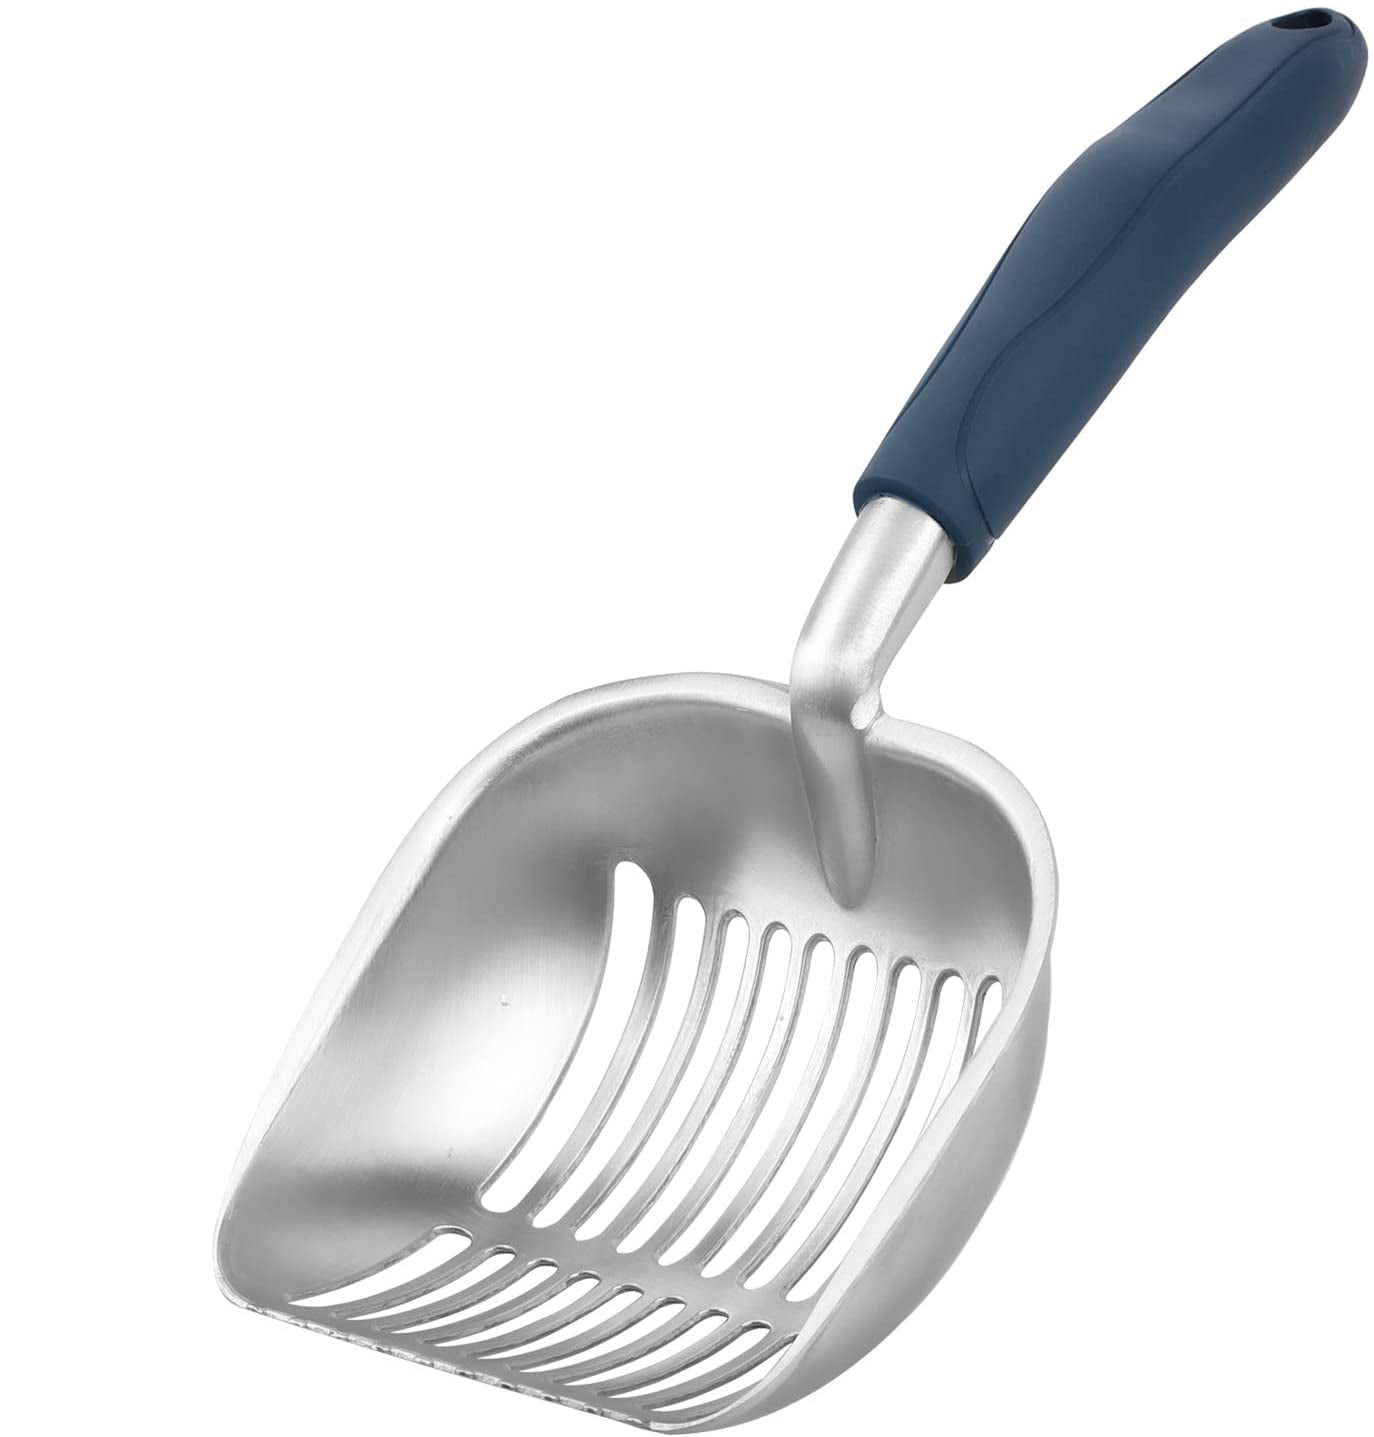 Solid Cat Litter Scoop with Silicone Handle, Aluminum Alloy Deep Cat Shovel, Large Pet Litter Scoop Metal with Mesh, Lightweight Shovel Suitable for All Kitty Litter Box